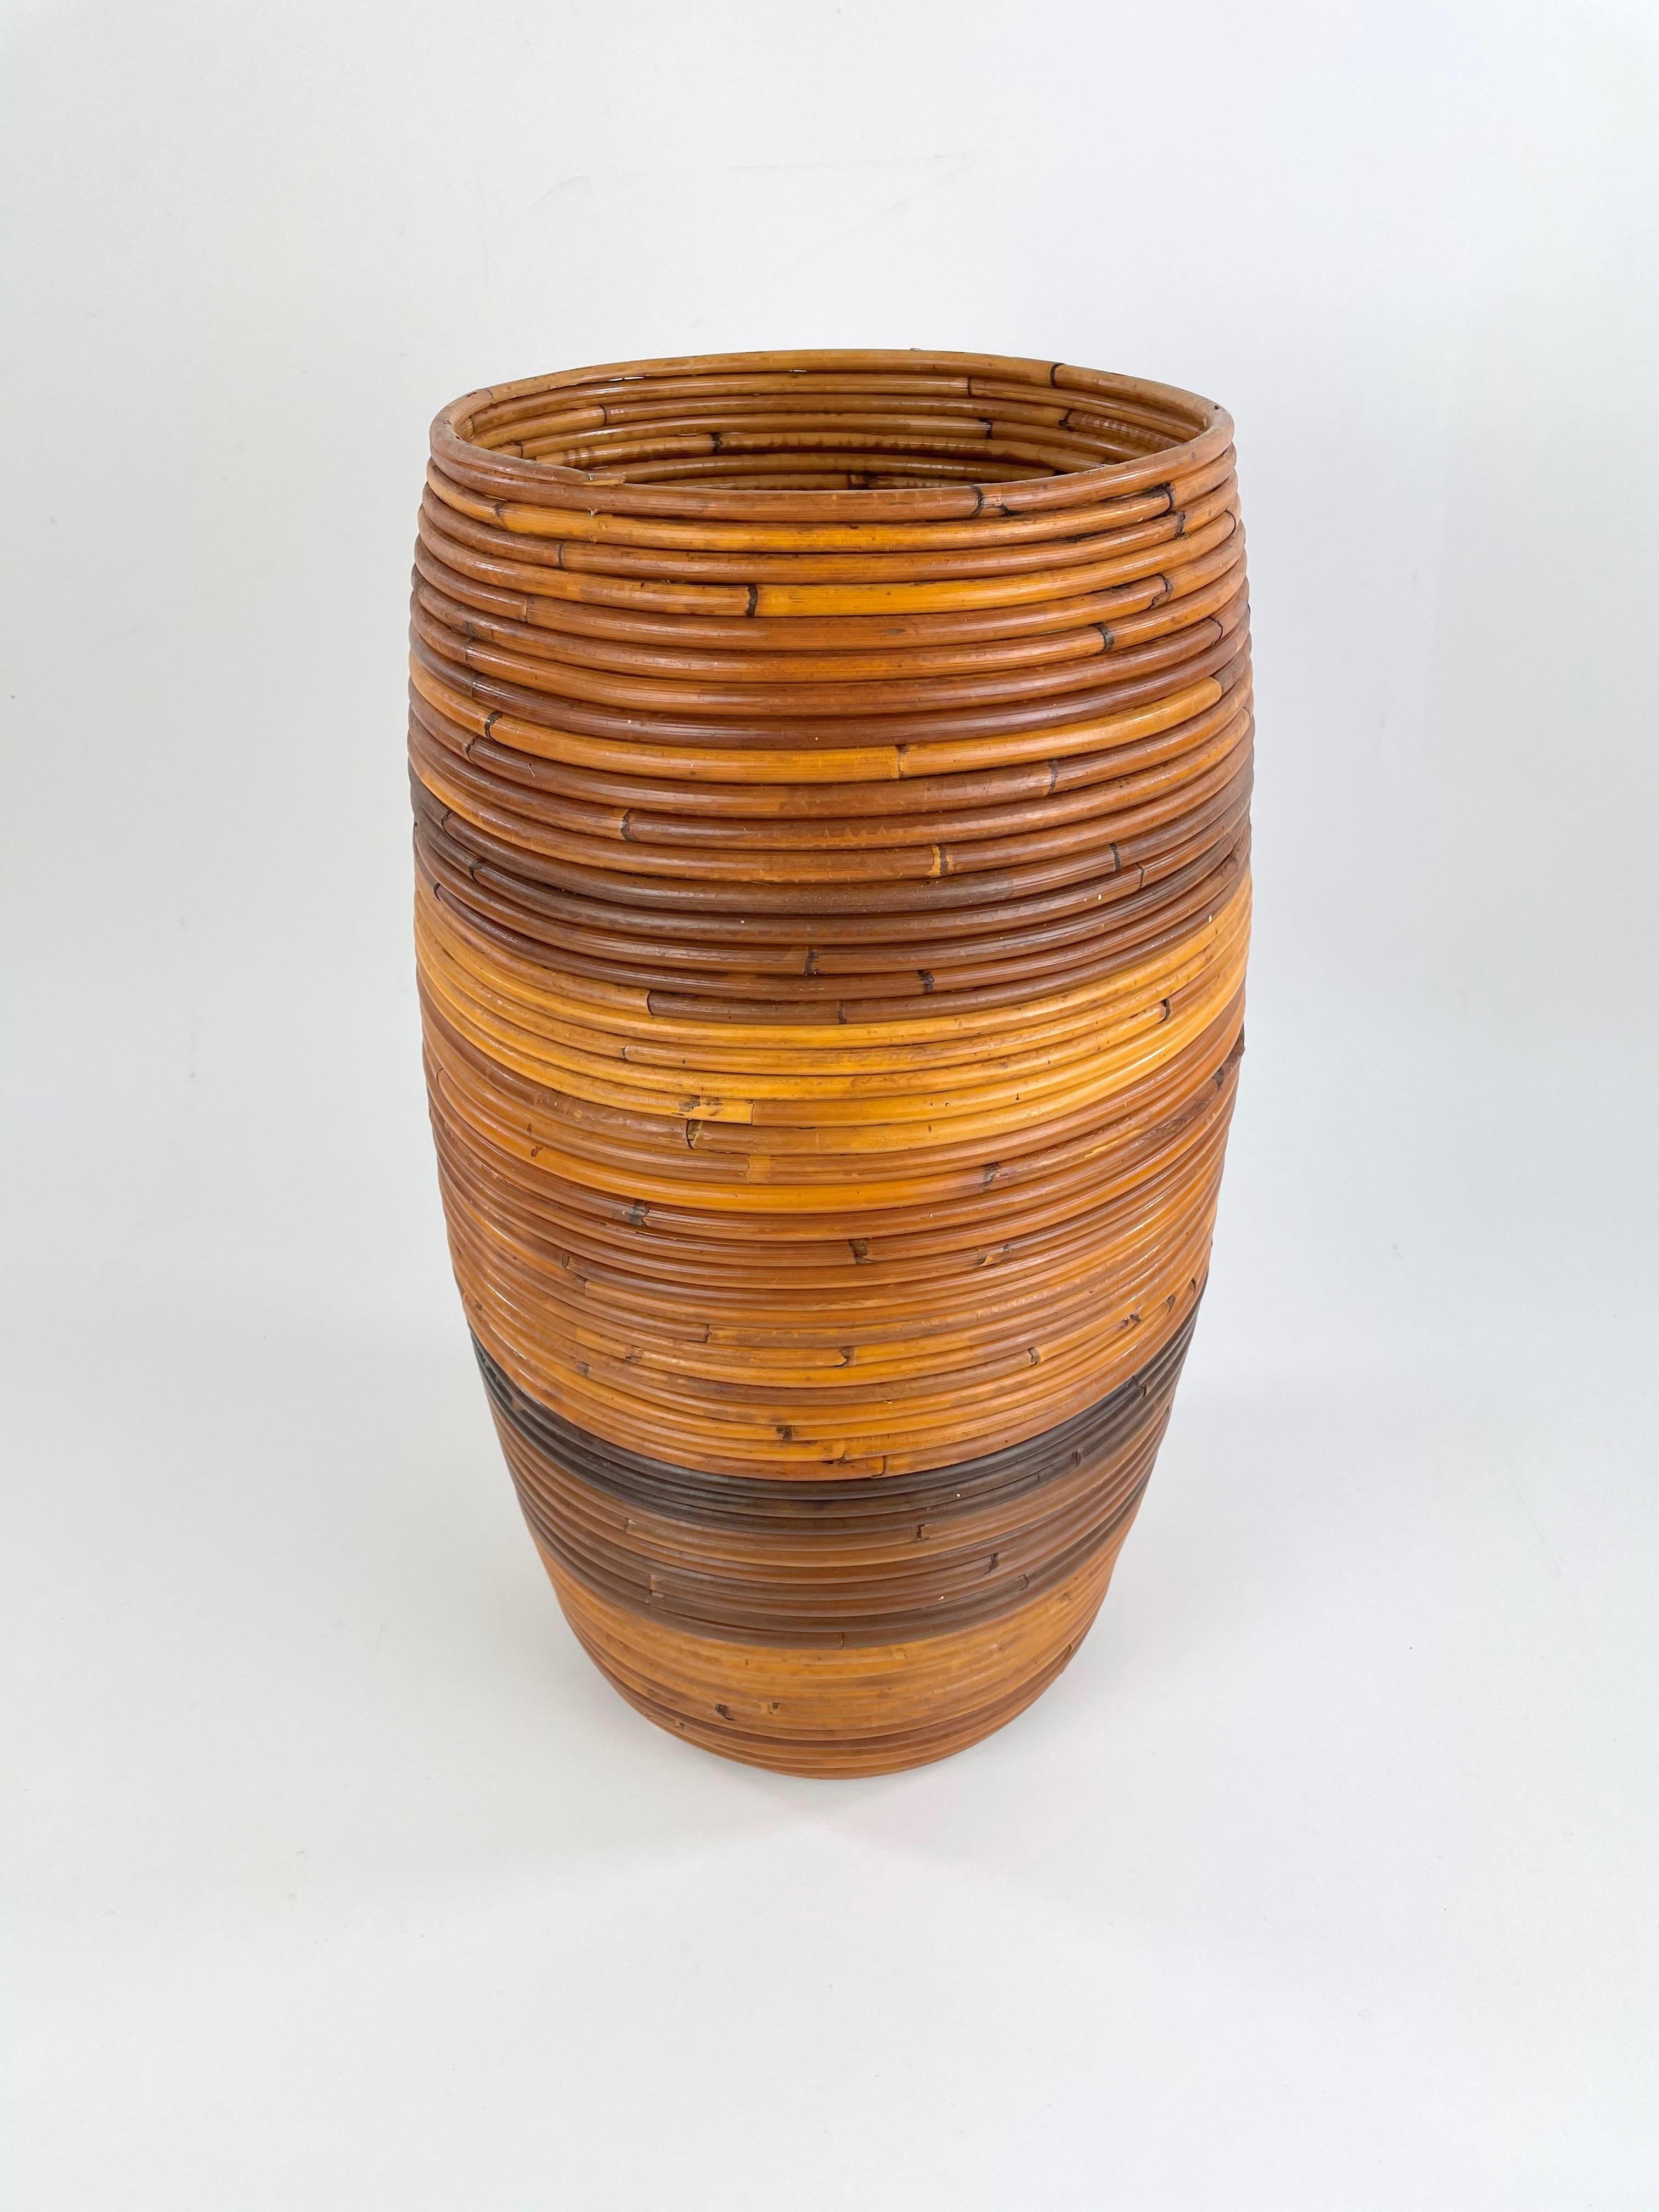 Umbrella stand or basket in rattan made in Italy in the 1960s.